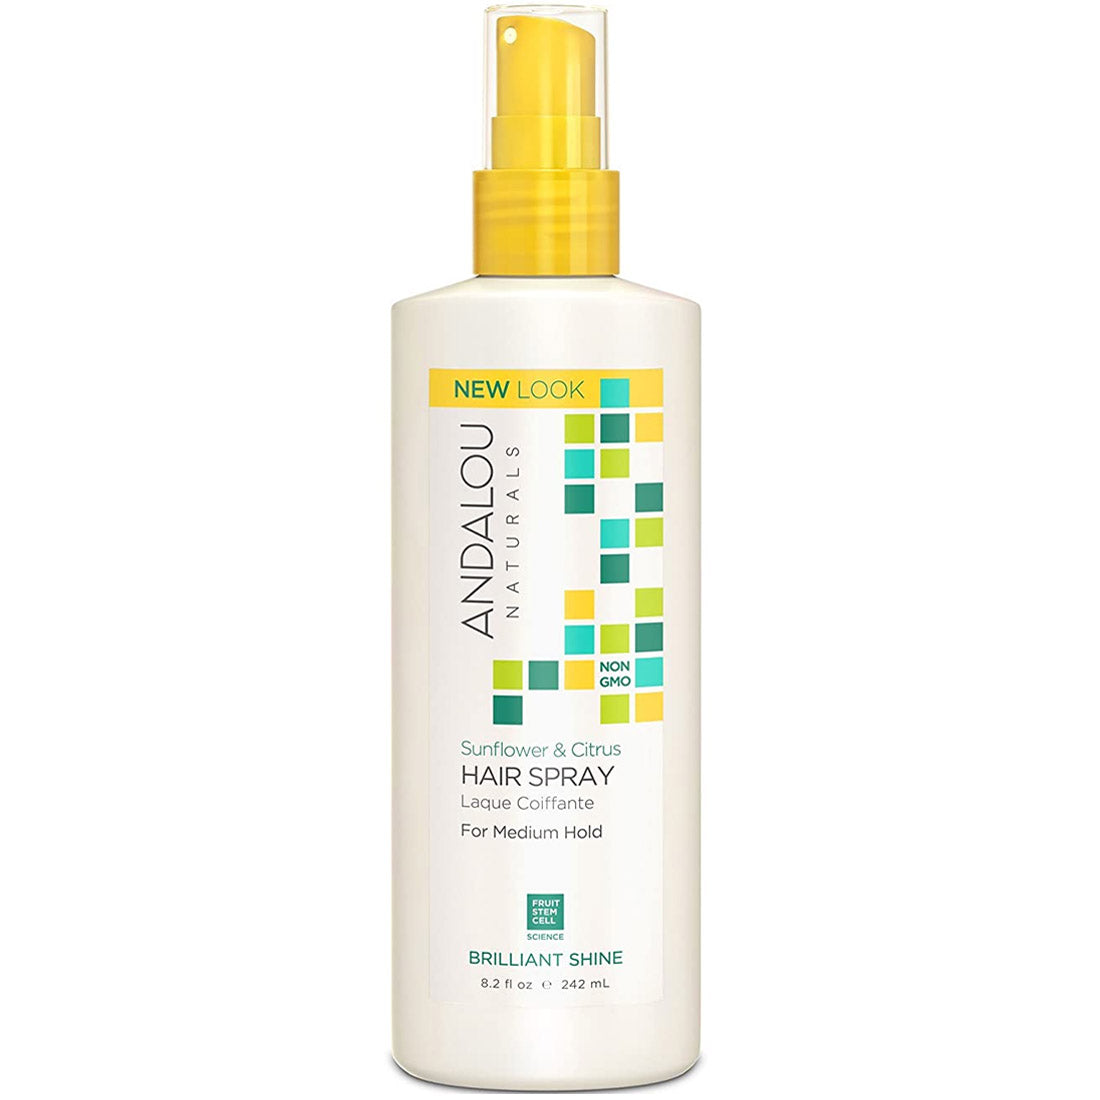 Andalou Naturals Sunflower Citrus Perfect Hold Hair Spray, 242ml